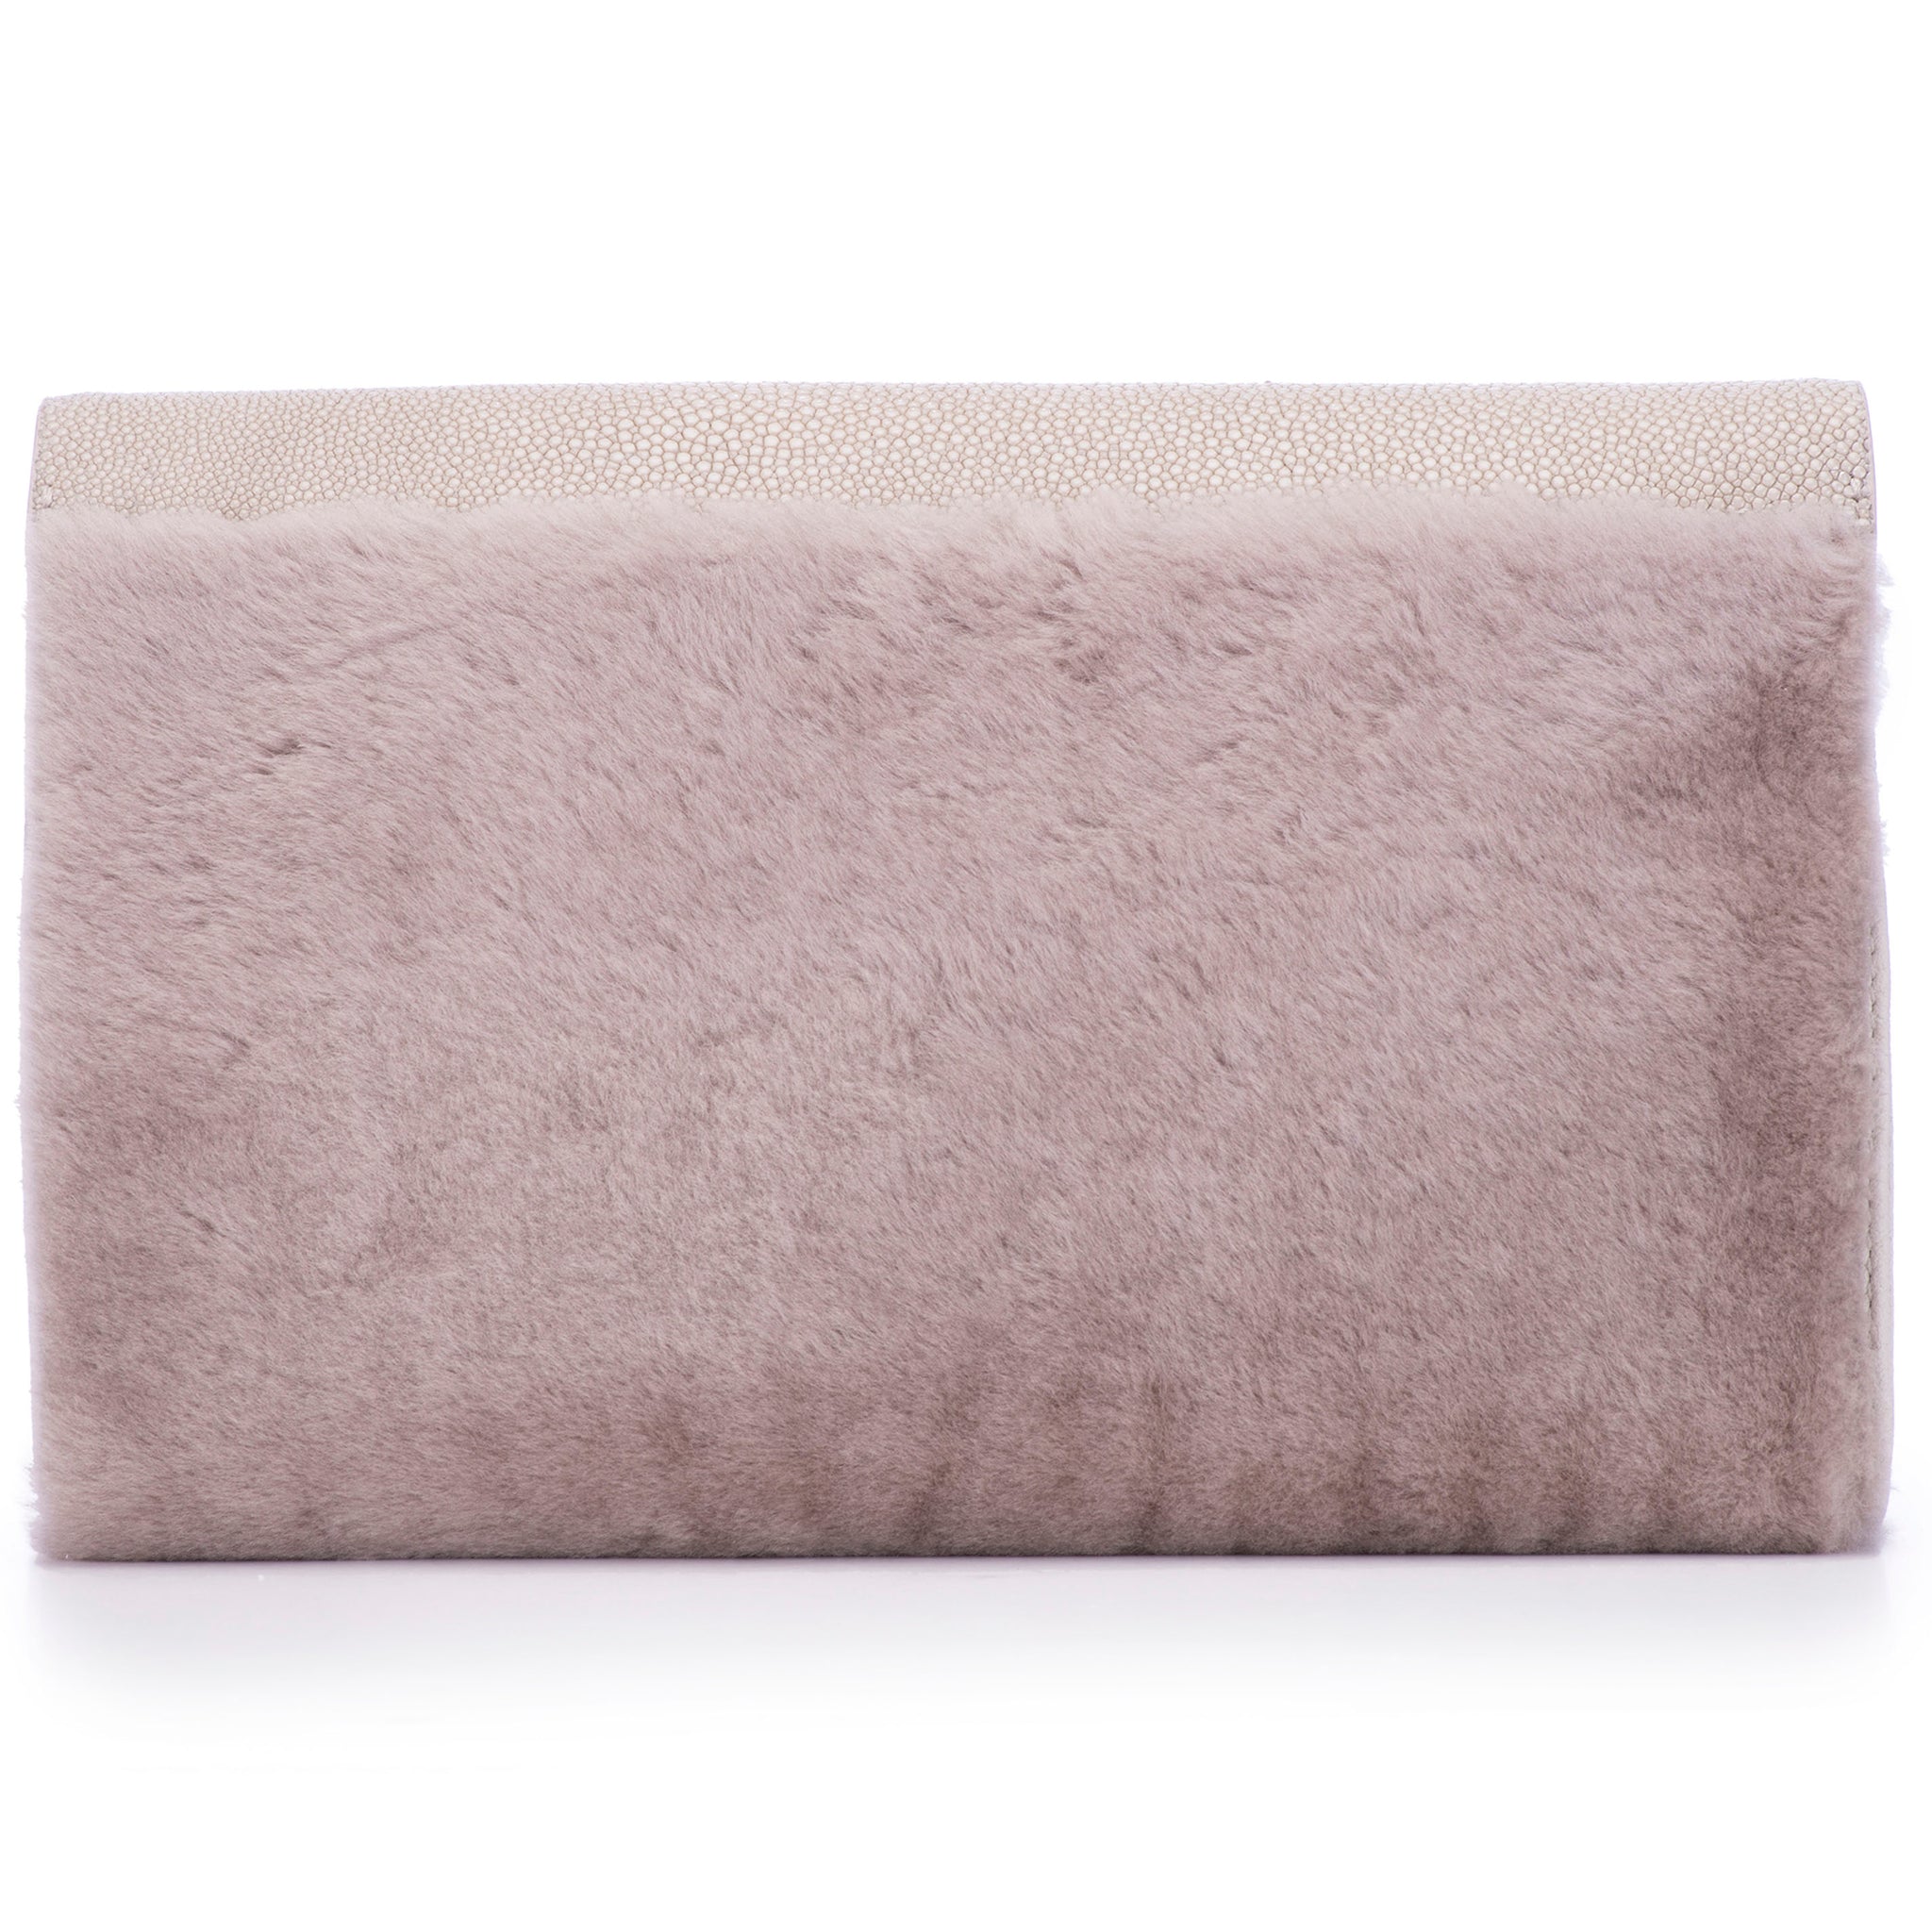 Cement Shagreen Light Gray Shearling Body Detachable Chain Holly Oversize Clutch BackView - Vivo Direct